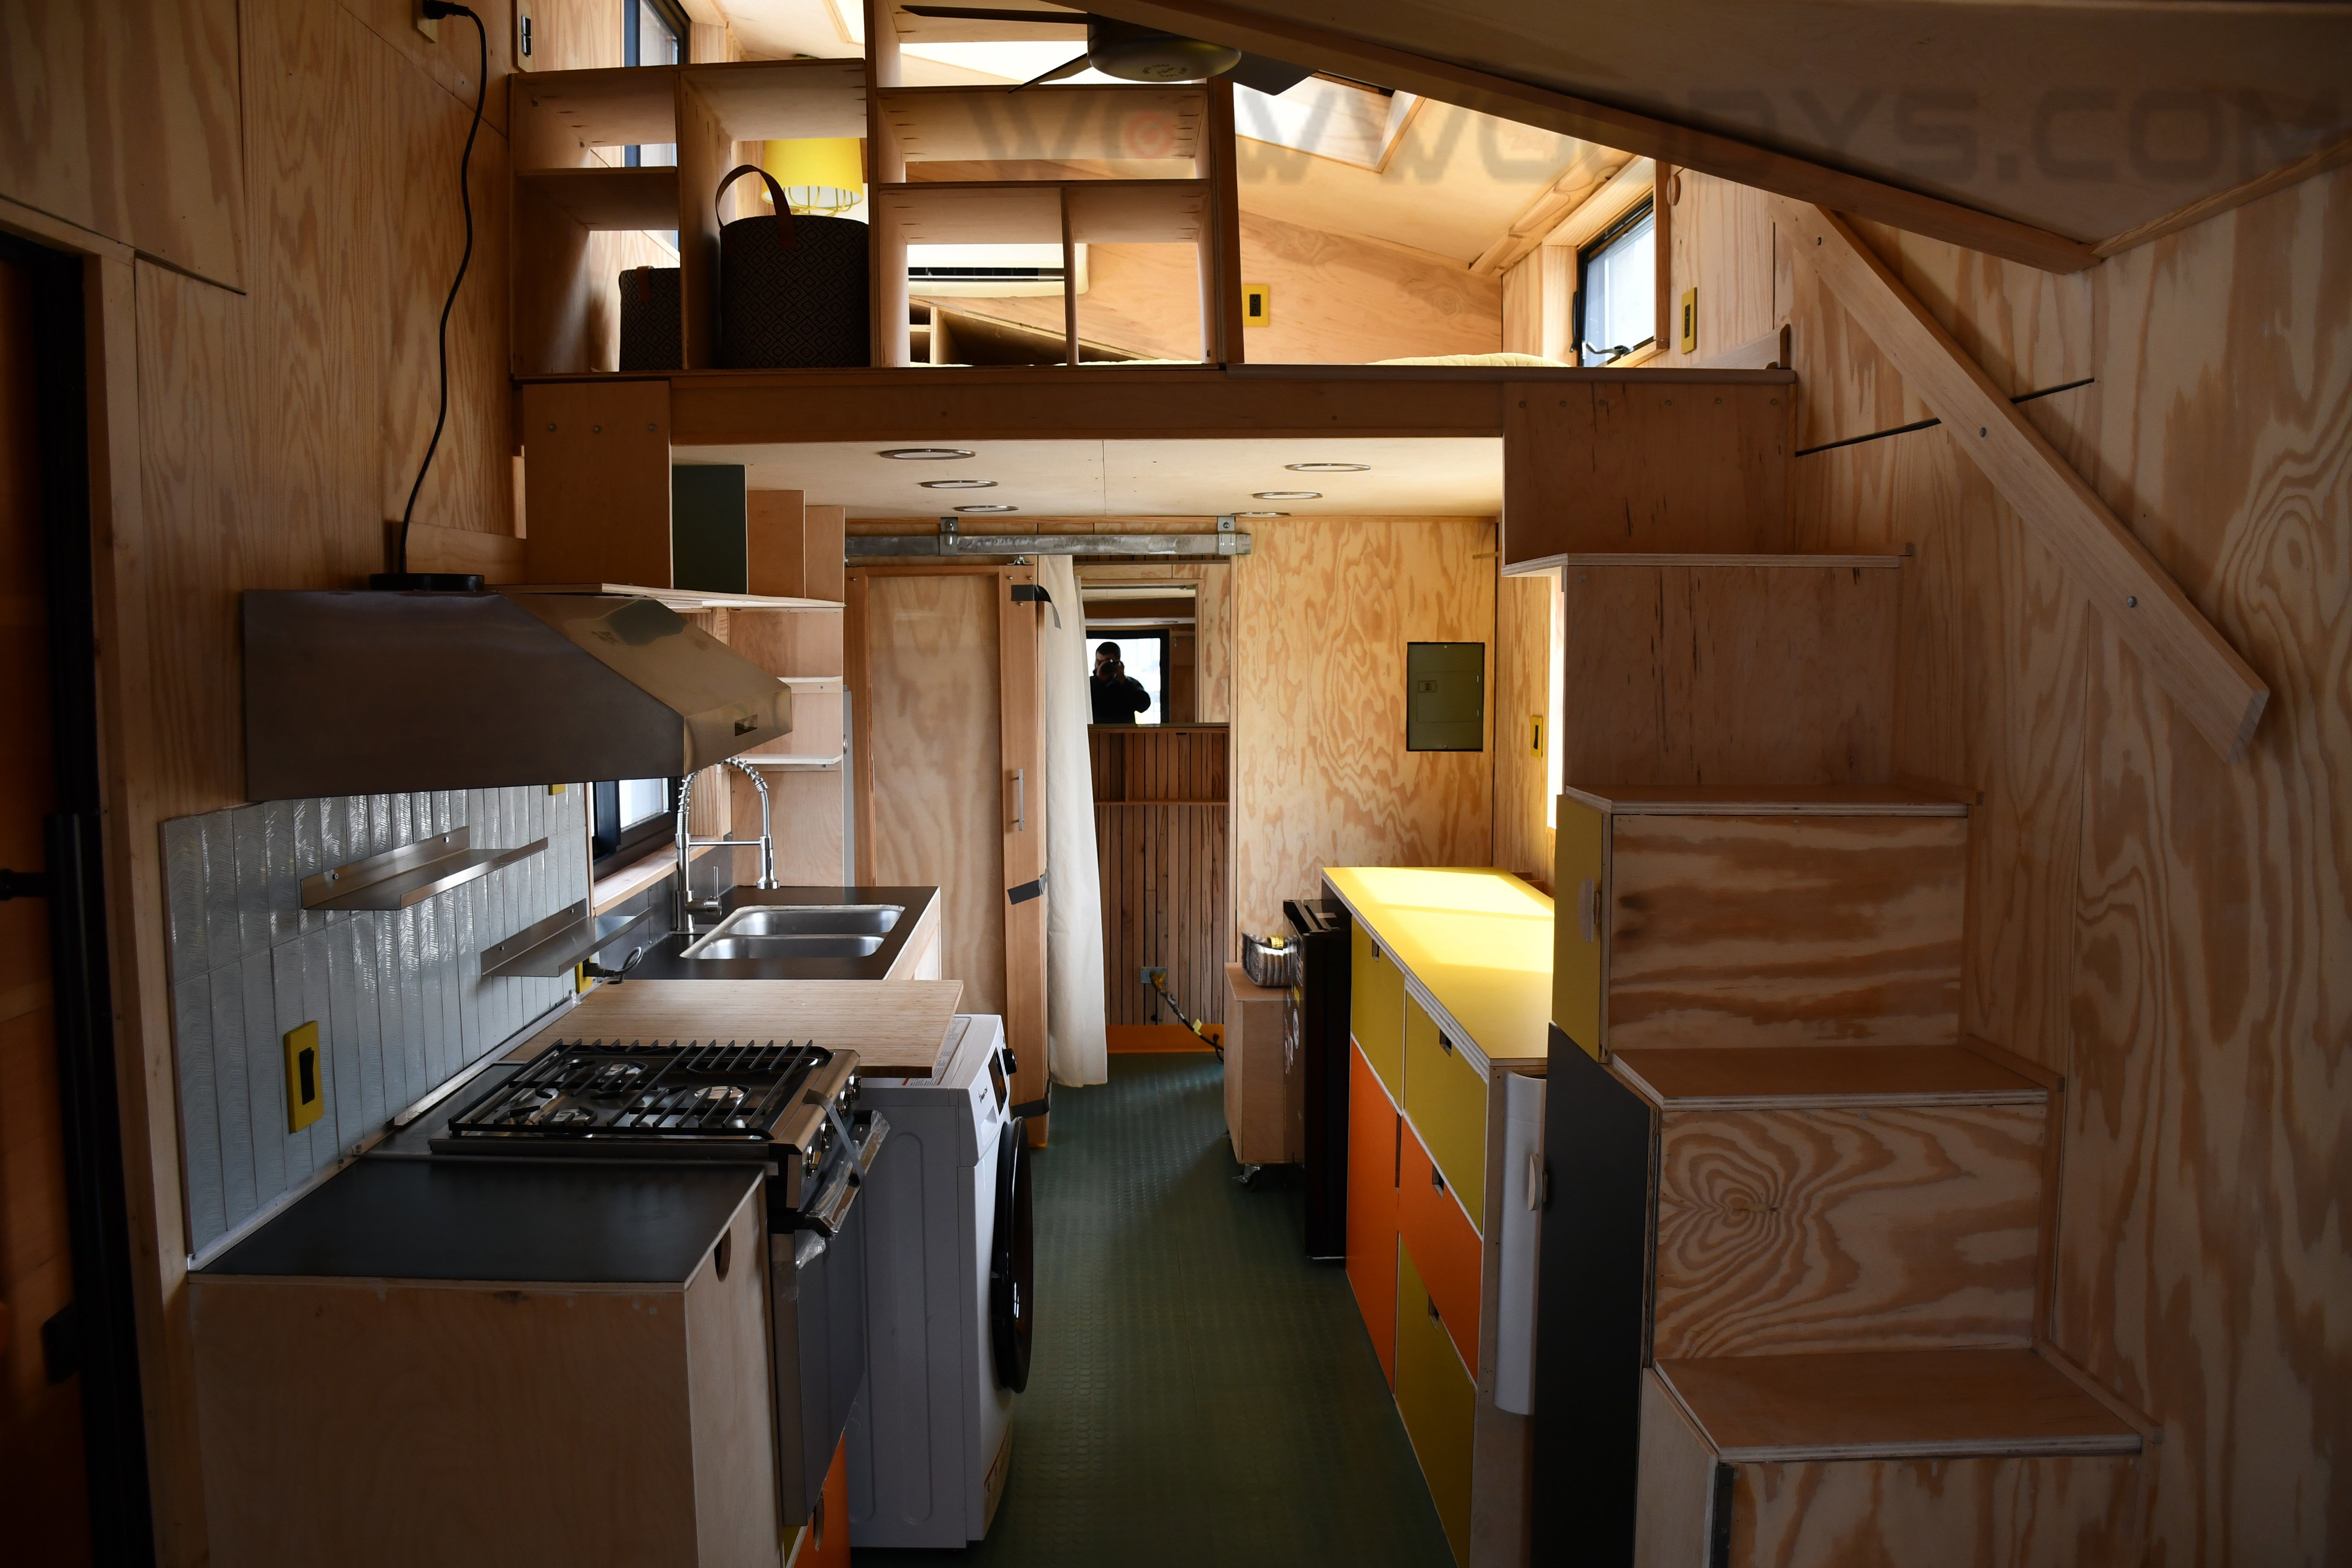 Meals on Wheels: How to Provision and Organize Your RV Kitchen